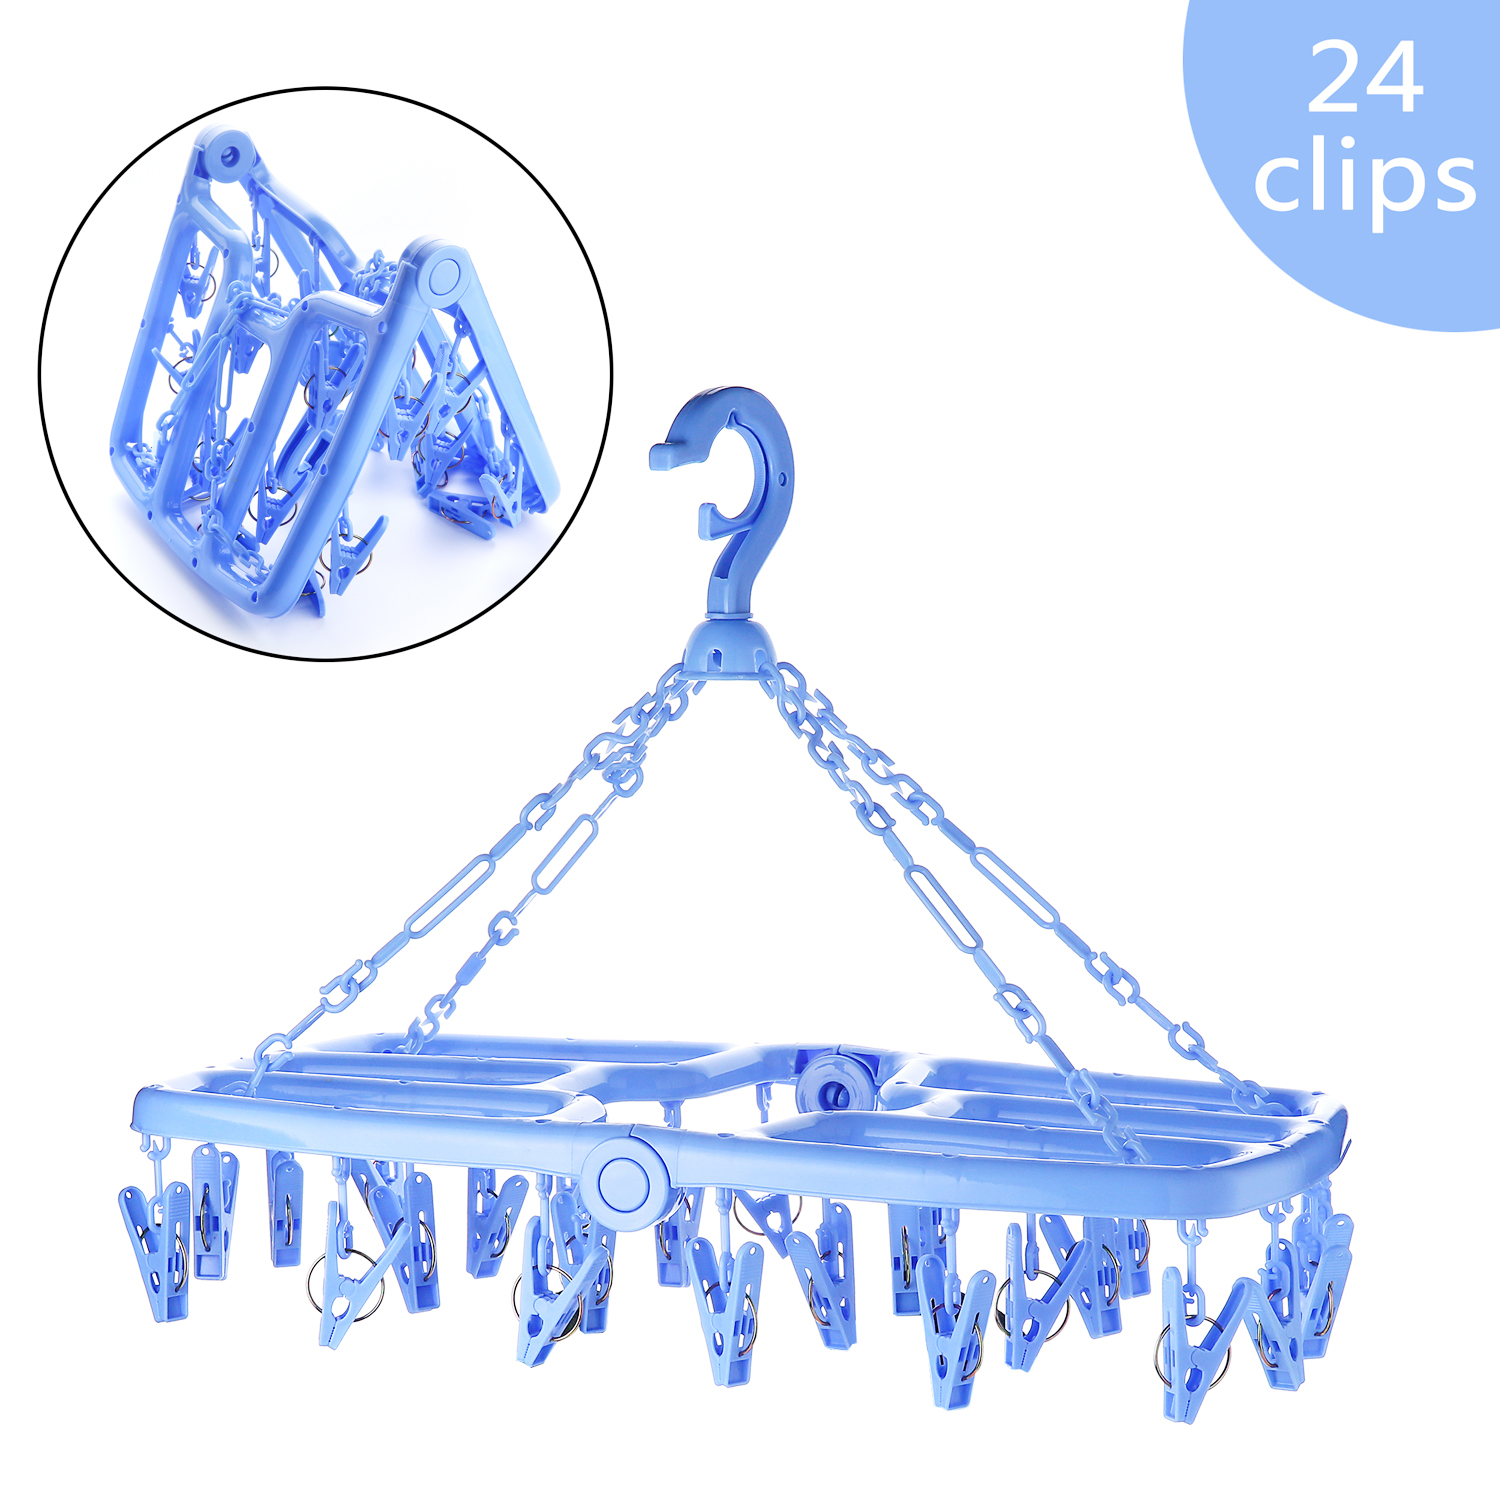 Keador Laundry Hanger Drying Rack, Foldable Clip and Drip Hanger with 24 Pins and Wind-Proof Hook for Drying Towels, Bras, Baby Clothes, Underwears, Plastic Laundry Sock Drying Hanger (Blue) 